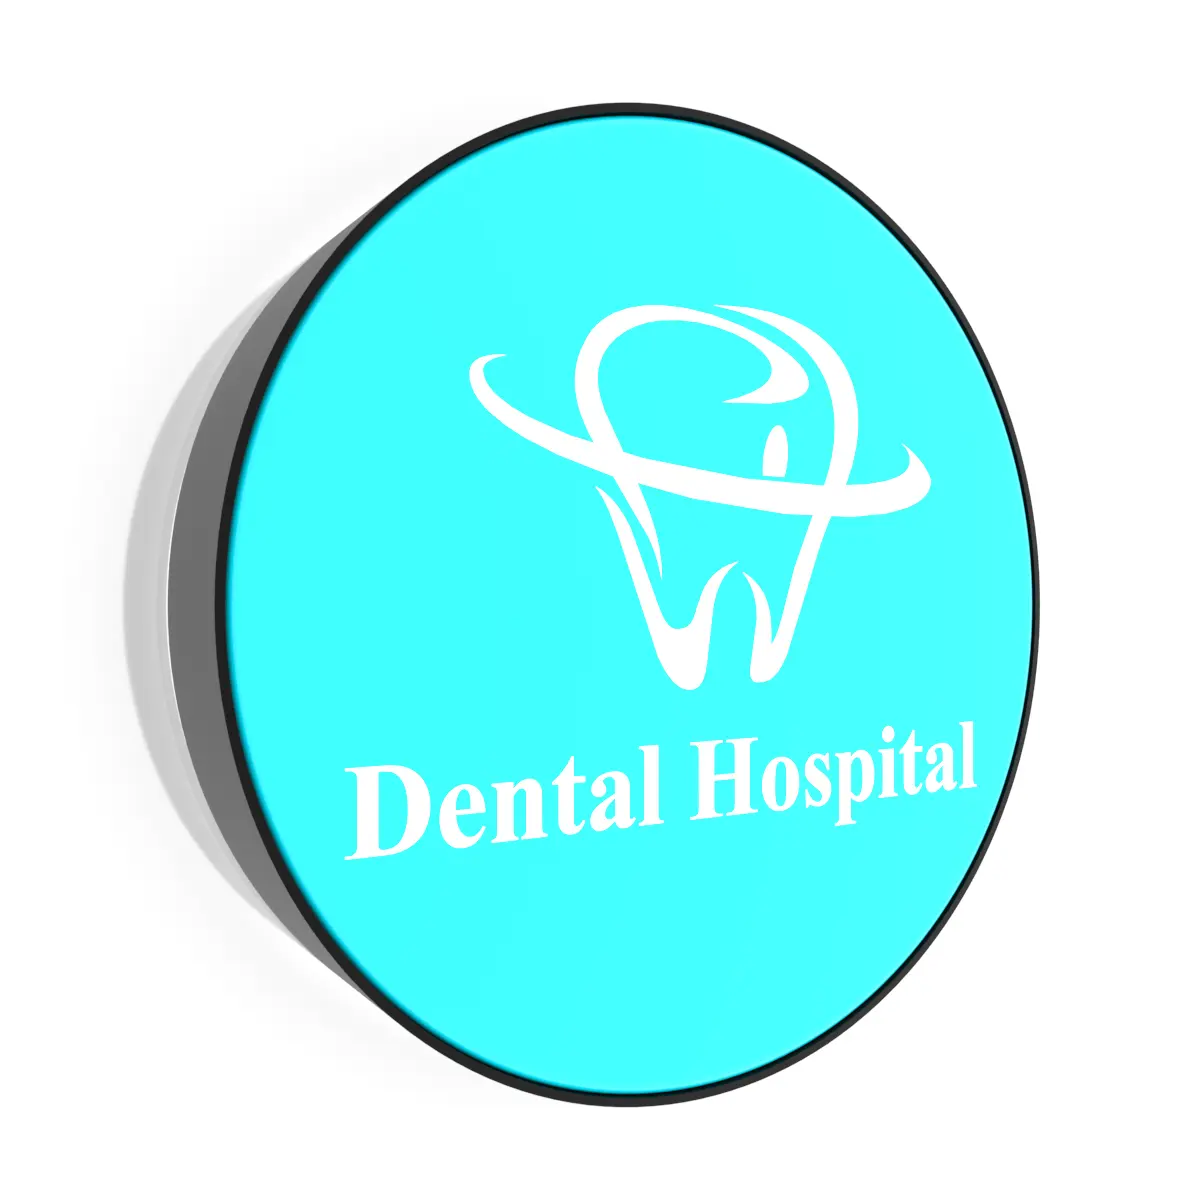 Custom Acrylic 3d Light Boxes Outdoor Storefront Lighting Box Waterproof Round Dental Hospital Advertising Sign